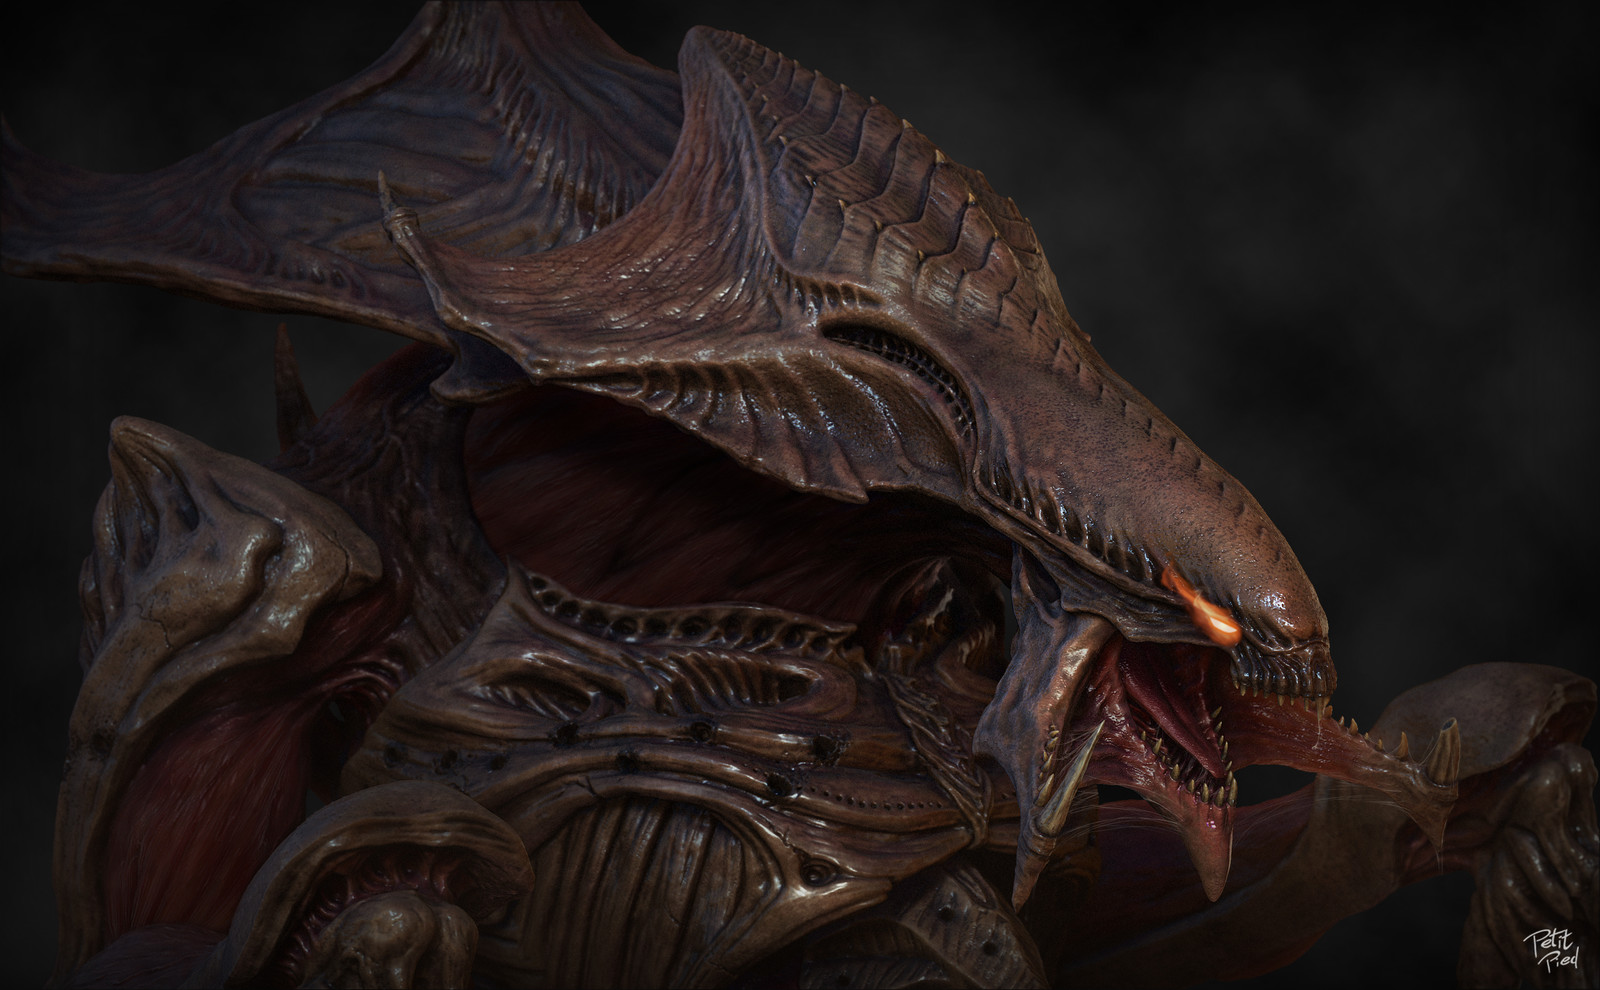 Hydralisk sculpt &amp; render made in Zbrush and Photoshop